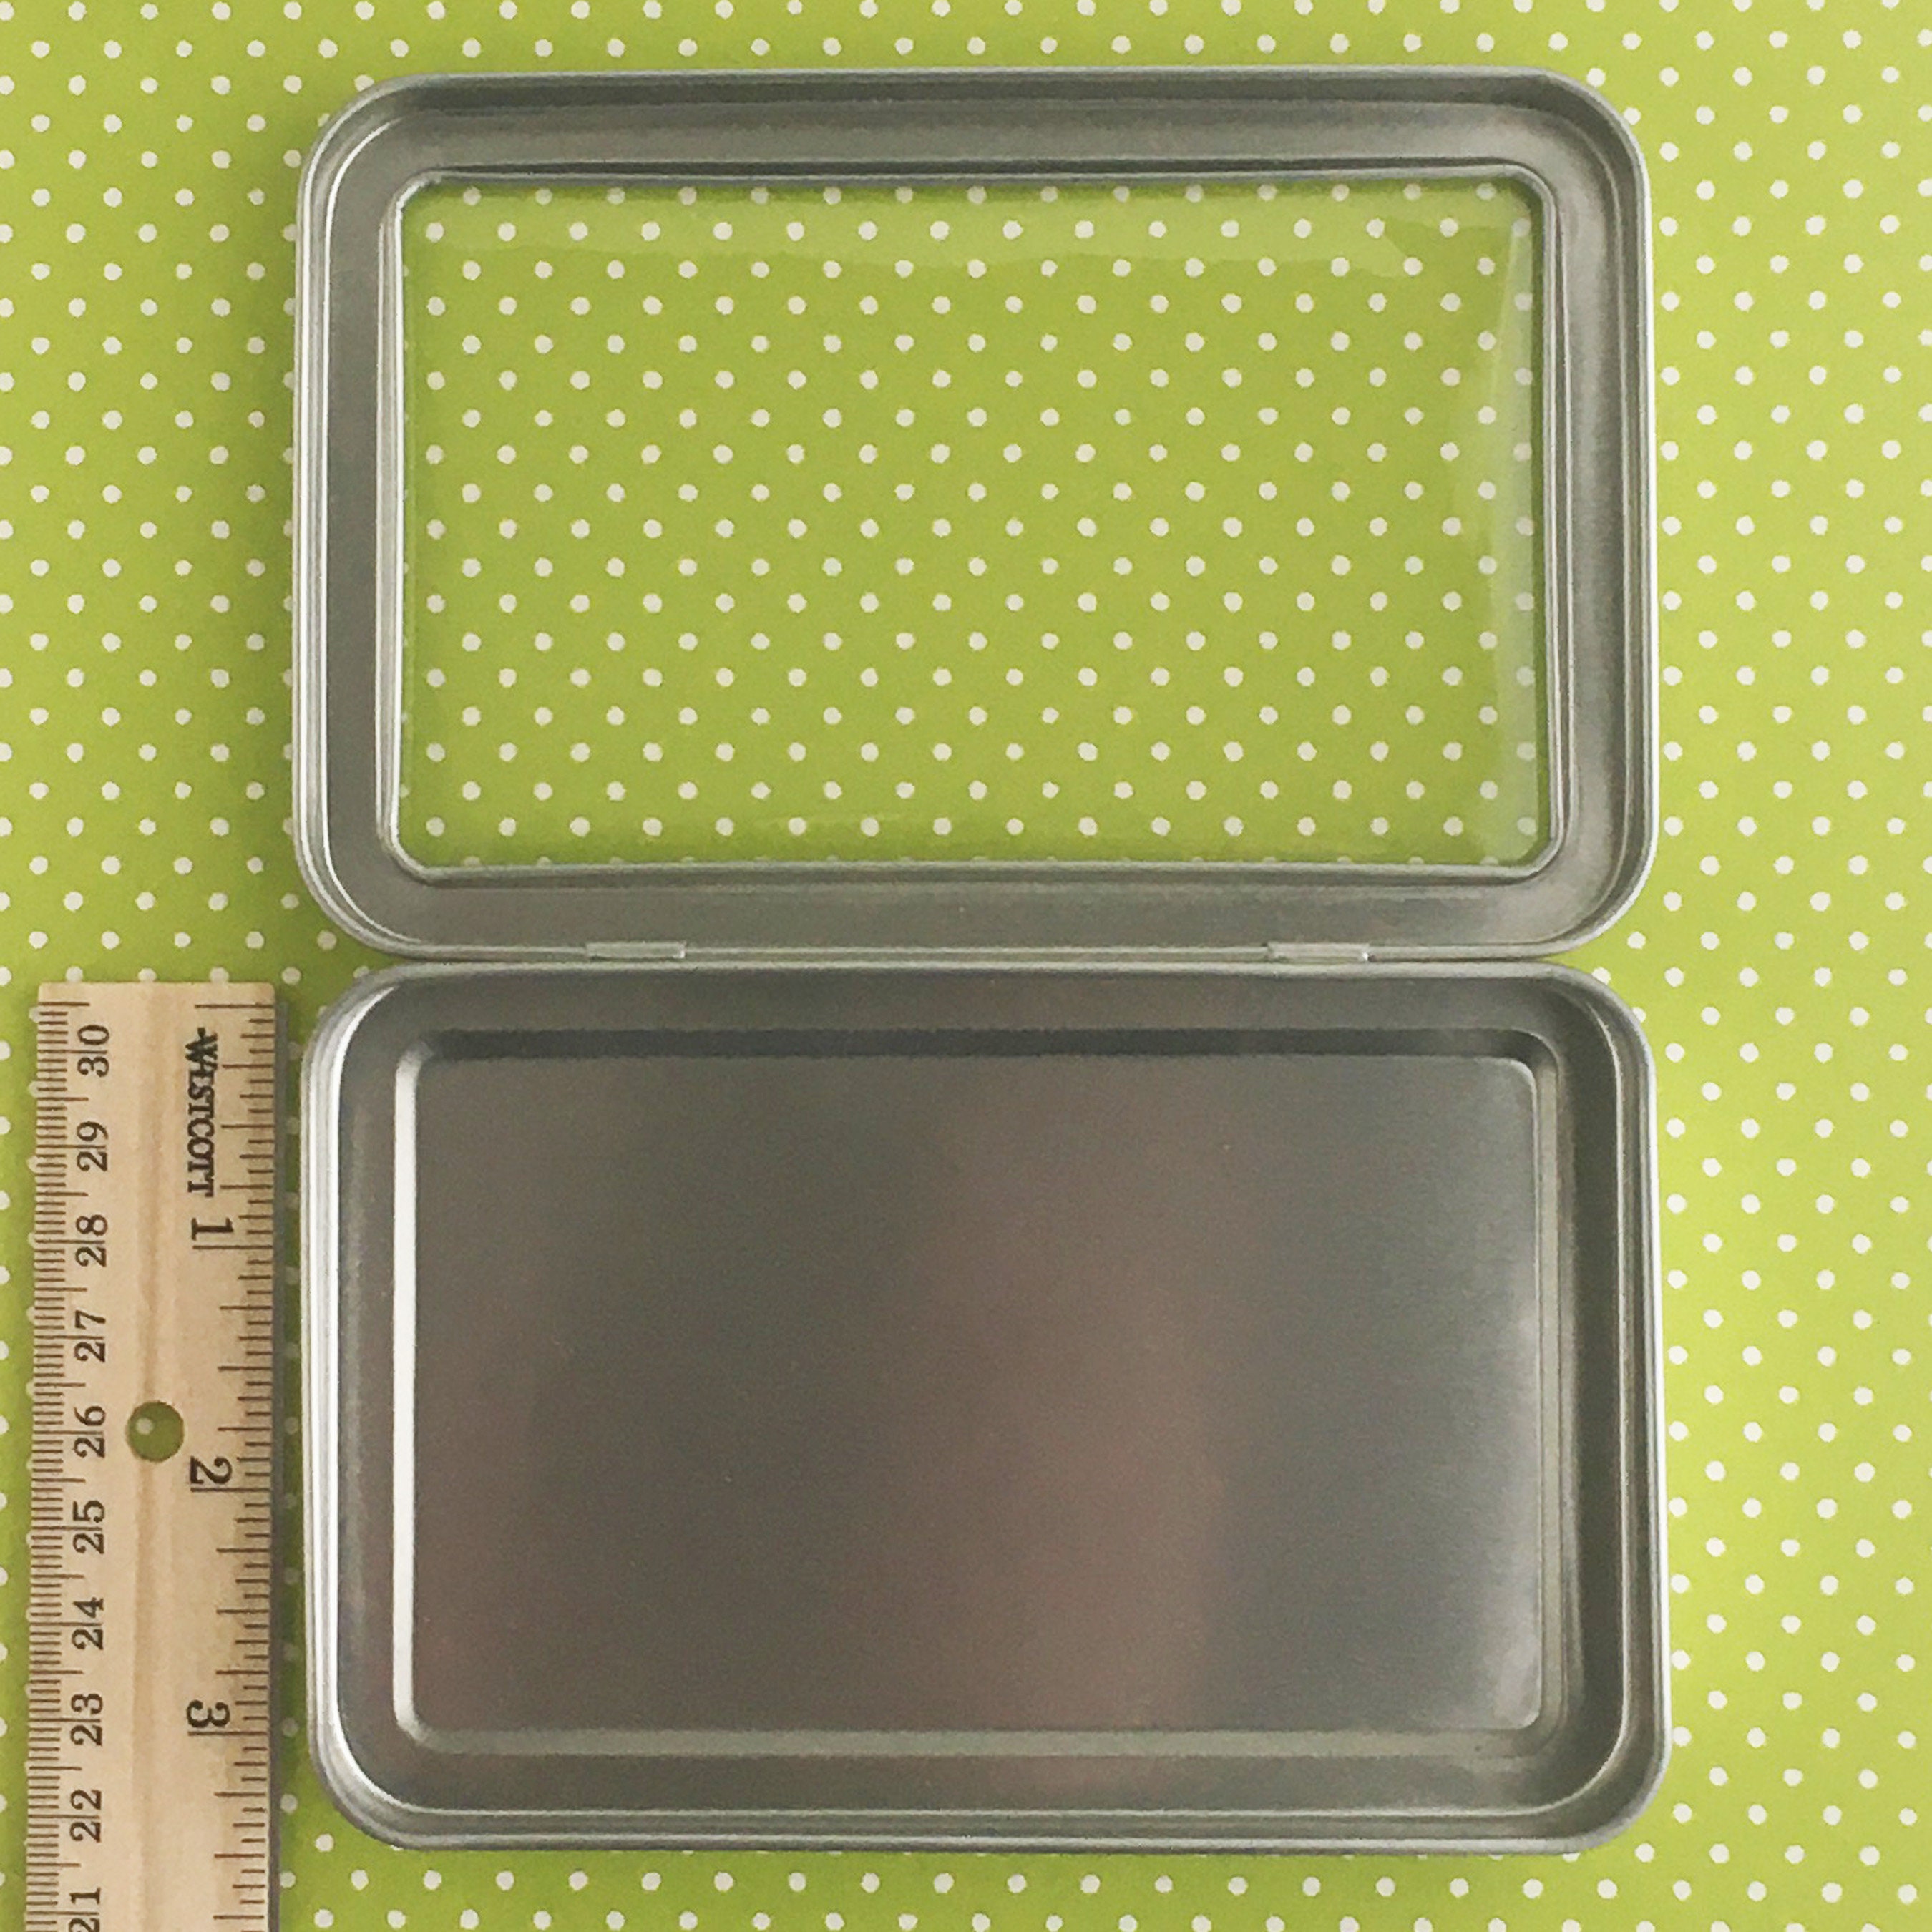 8.5 by 5.3 by 1.9 Inch Silver Metal Rectangular Empty Tin Box